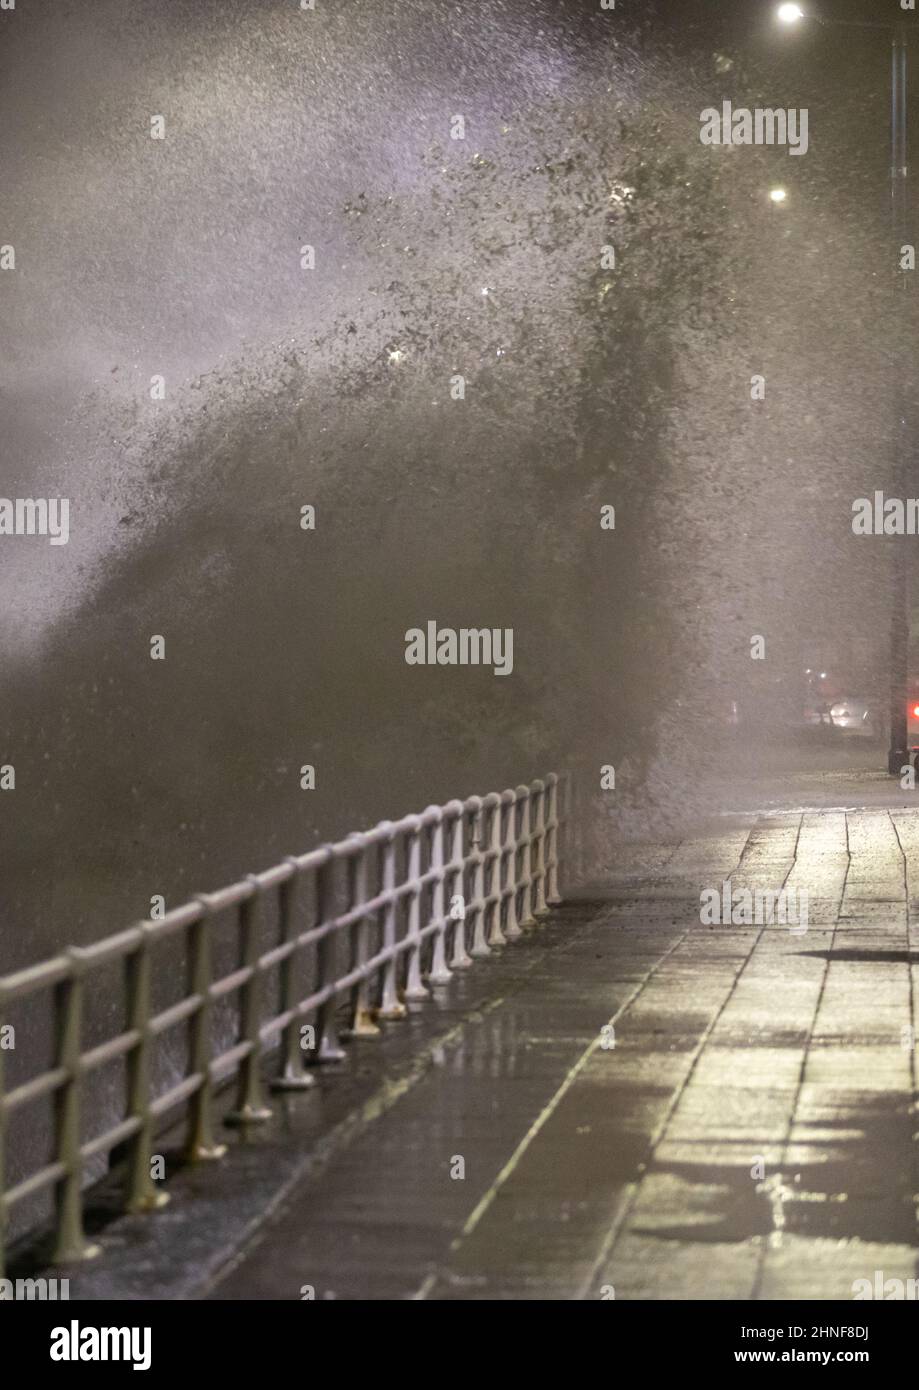 Aberystwyth, Ceredigion, Wales, UK. 16th February 2022  UK Weather: A windy night in Aberystwyth, as storm Dudley combines with a high tide, bringing rough seas crashing against the promenade. © Ian Jones/Alamy Live News Stock Photo